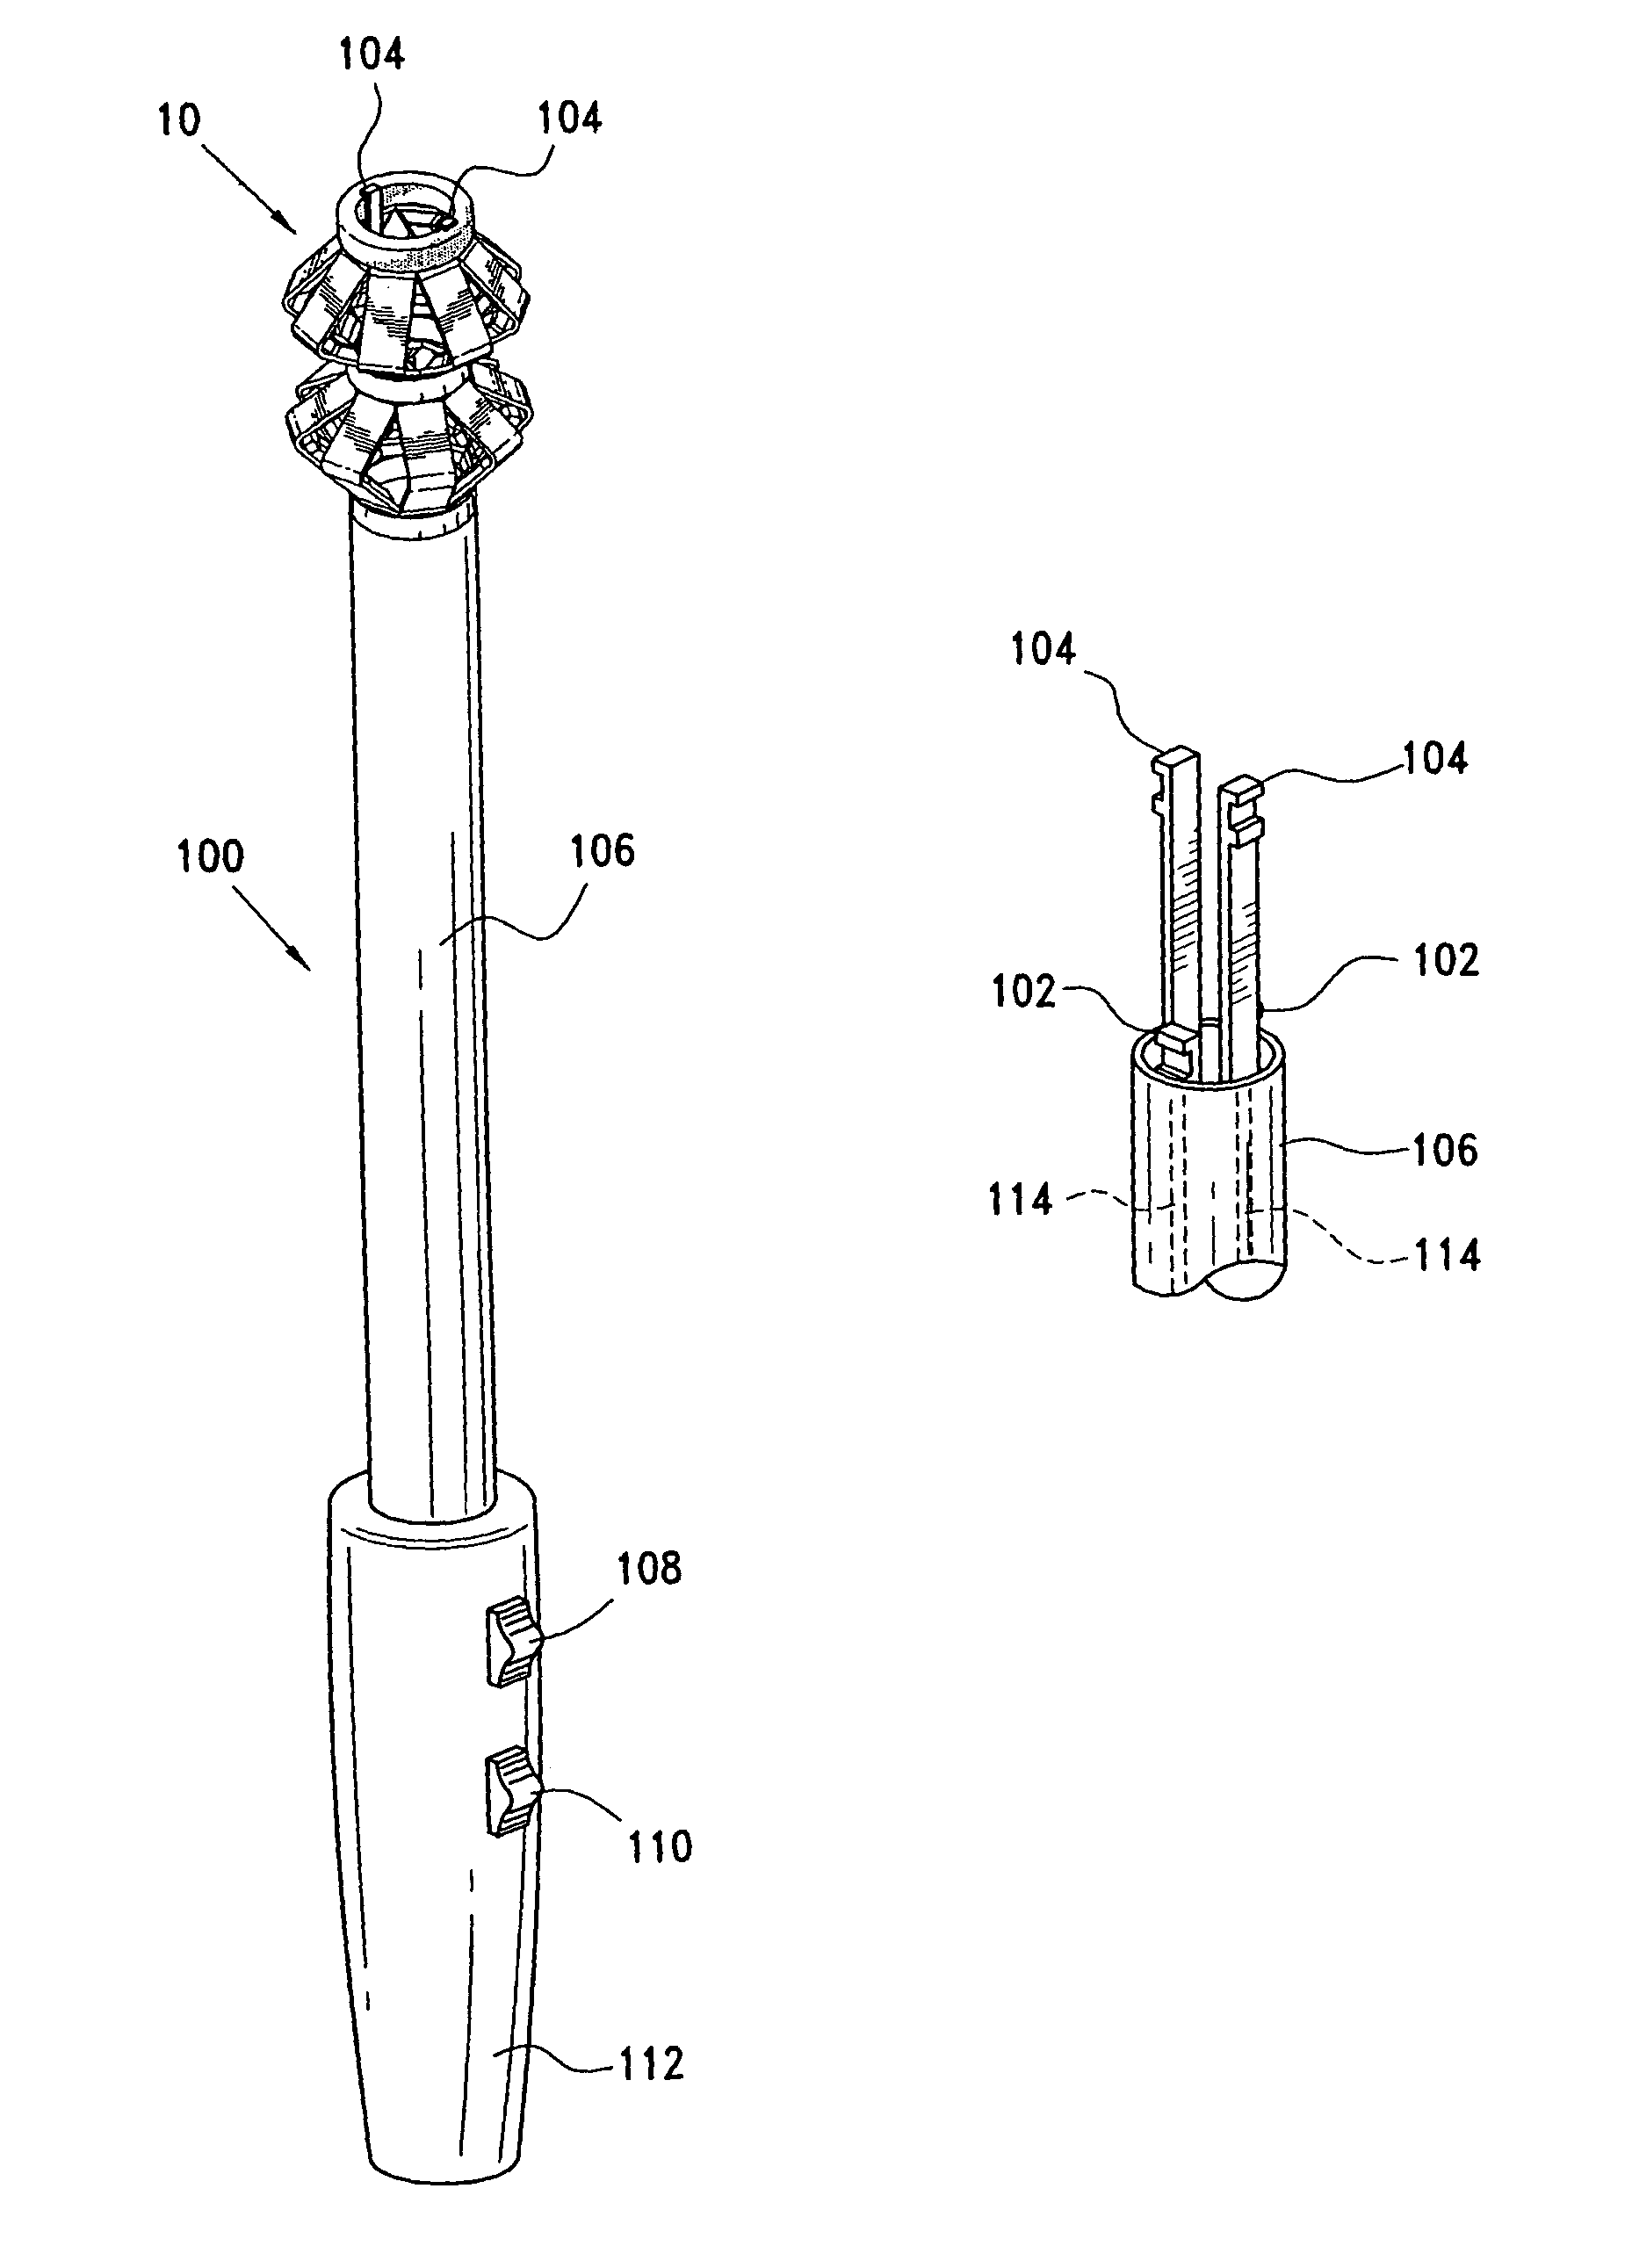 Method and apparatus for sealing a gastric opening